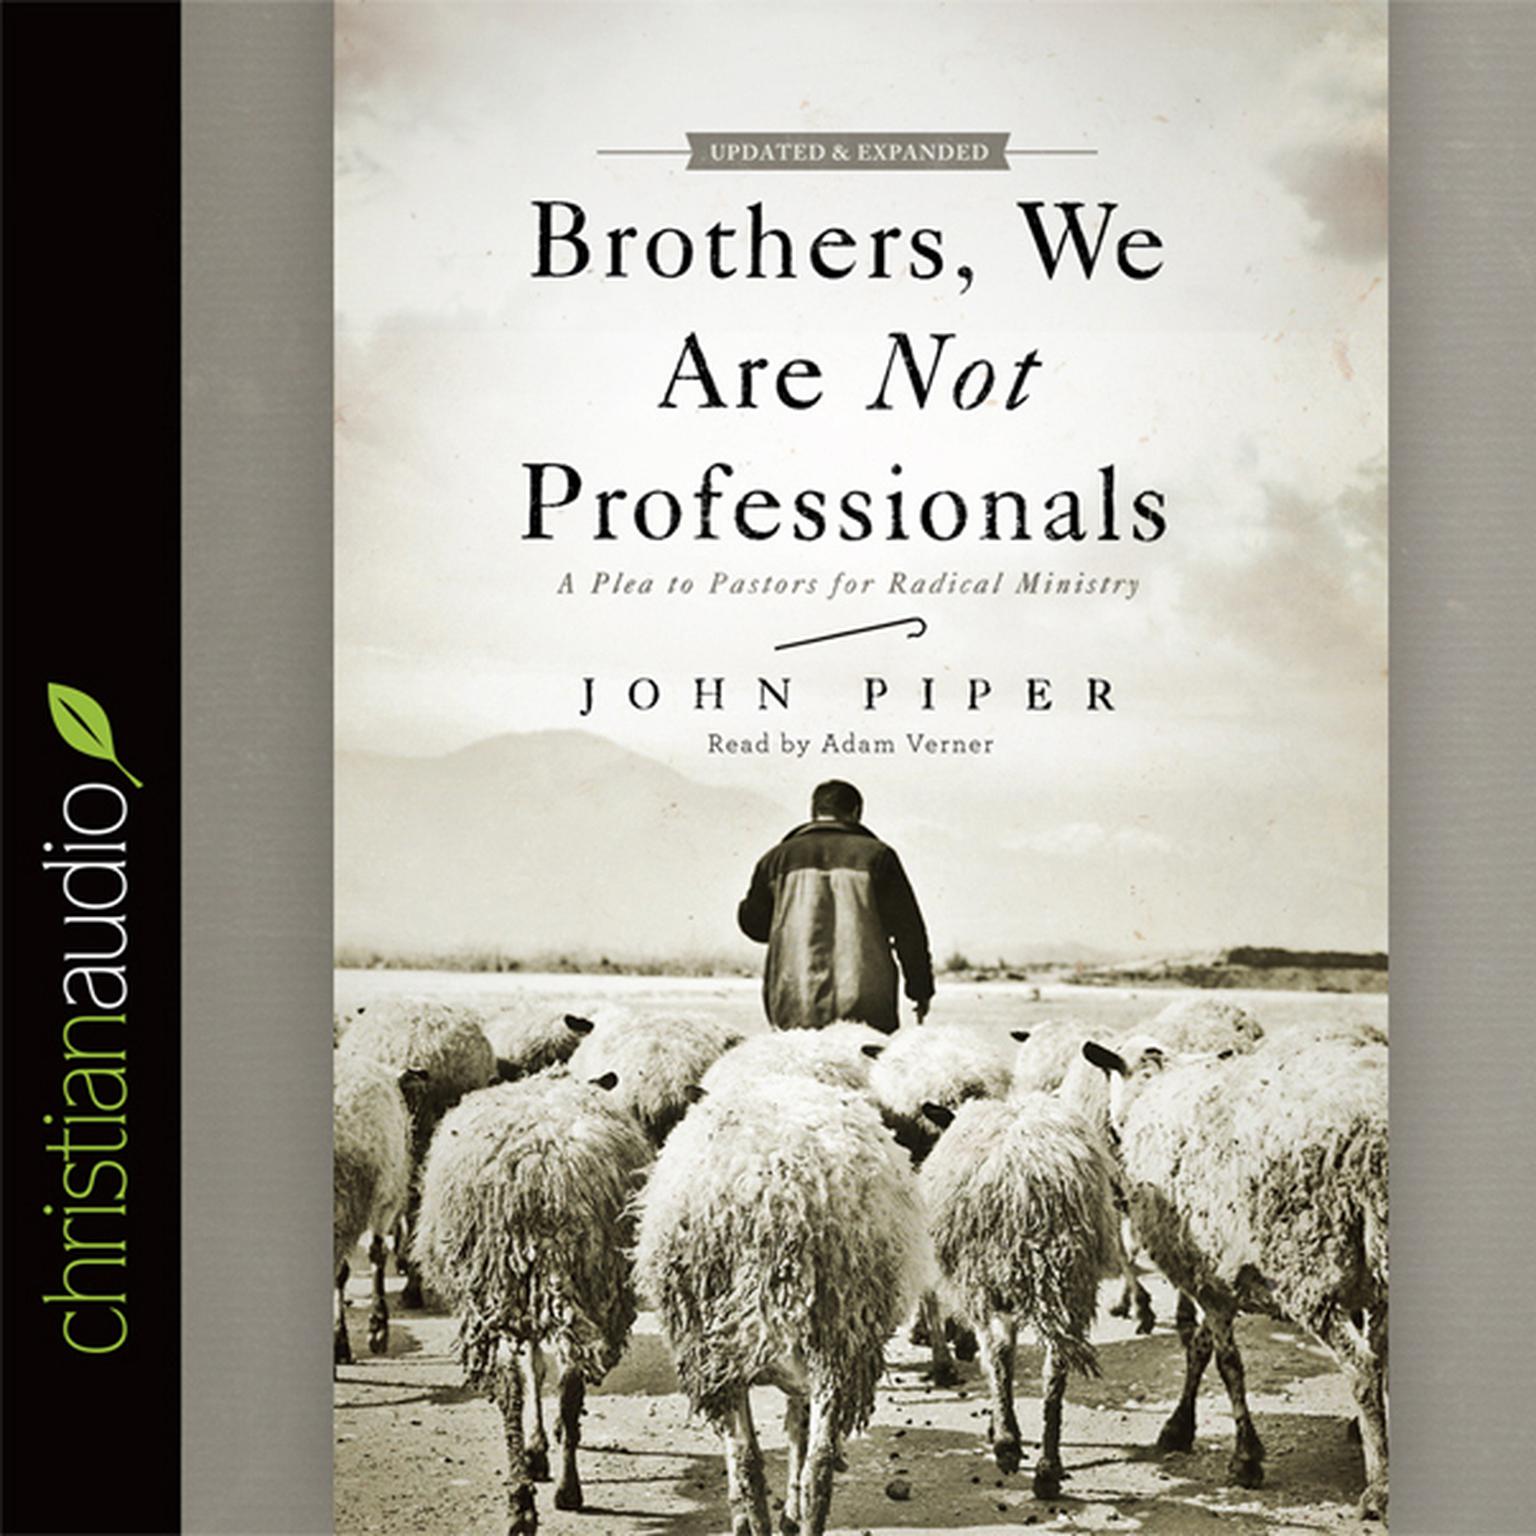 Brothers, We Are Not Professionals: A Plea to Pastors for Radical Ministry Audiobook, by John Piper